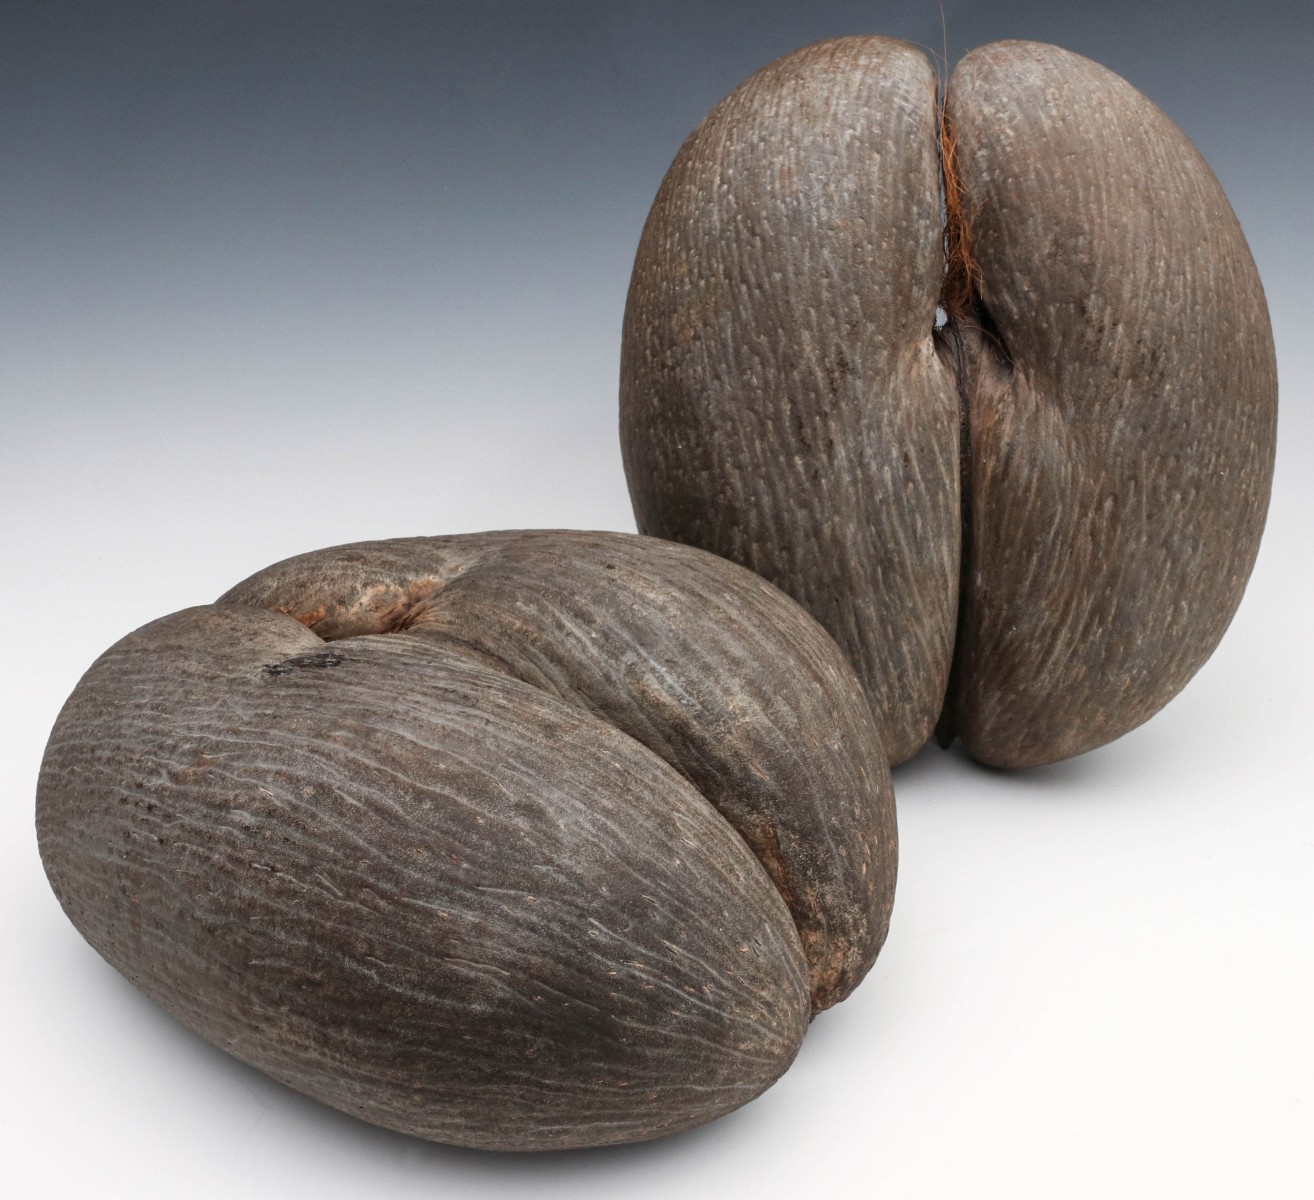 #375: TWO GIANT COCO DE MEER SEED PODS